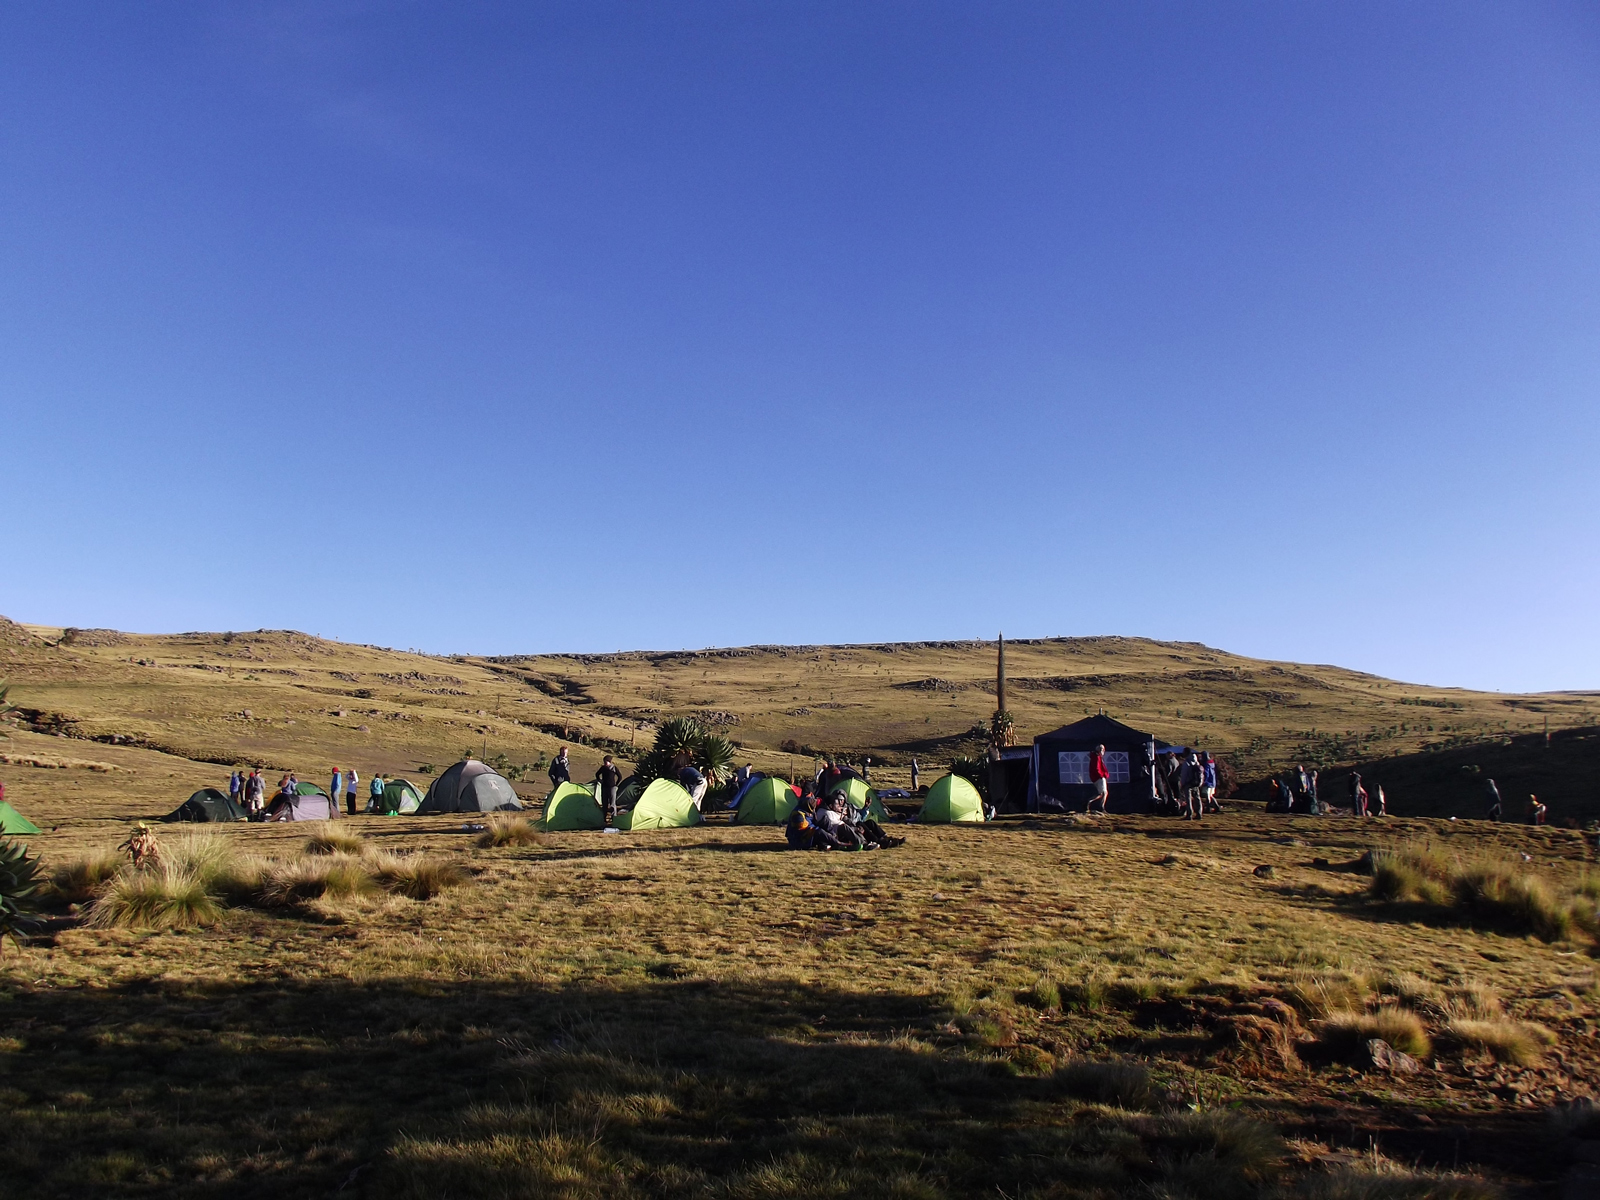 Gich campsite - where Sarah and her husband stayed on the second night of their Simien trek